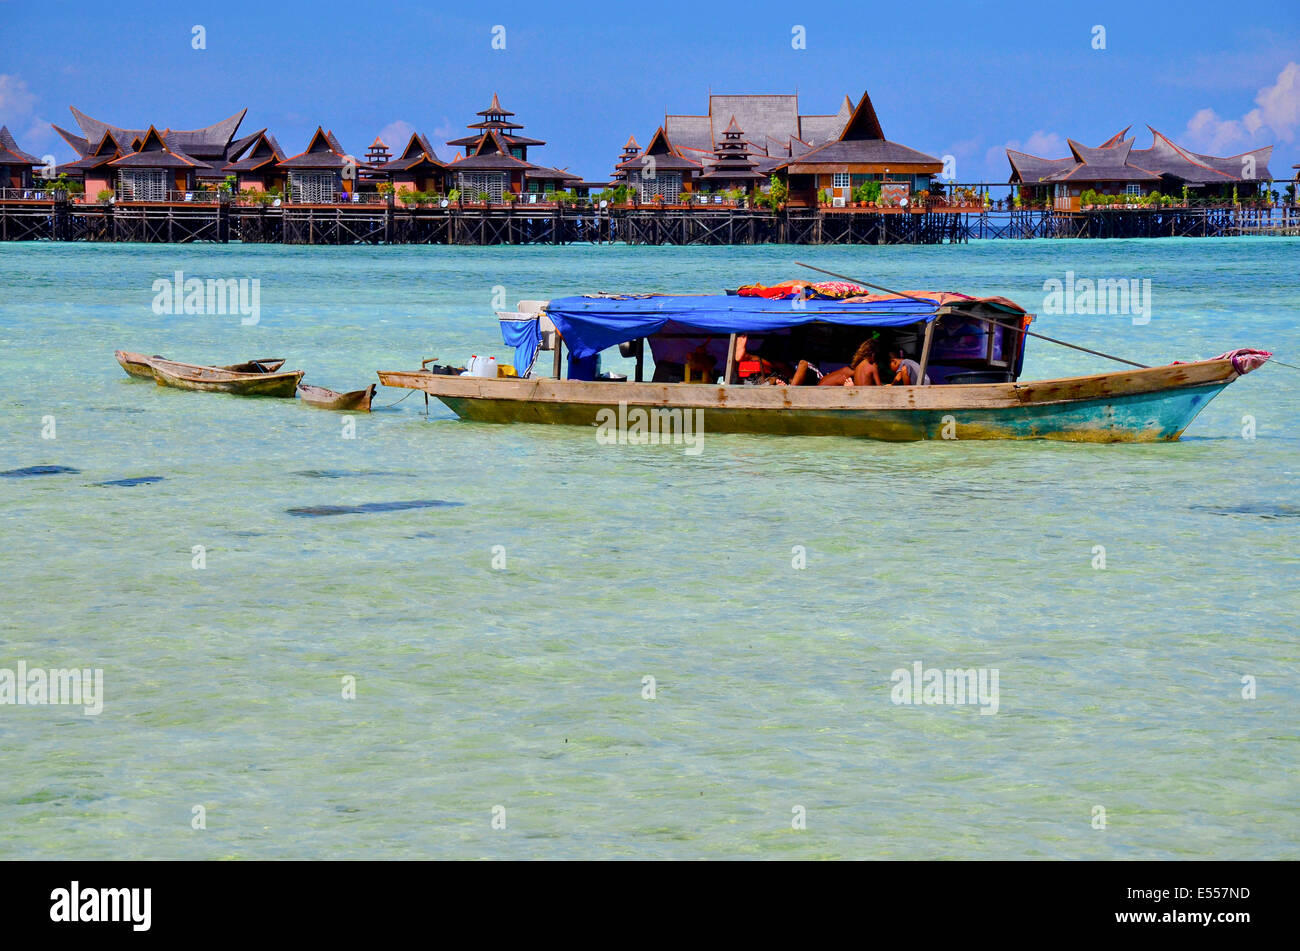 Bajau, sea nomads in traditional wooden boats, Celebes Sea, Malaysia, Stock Photo